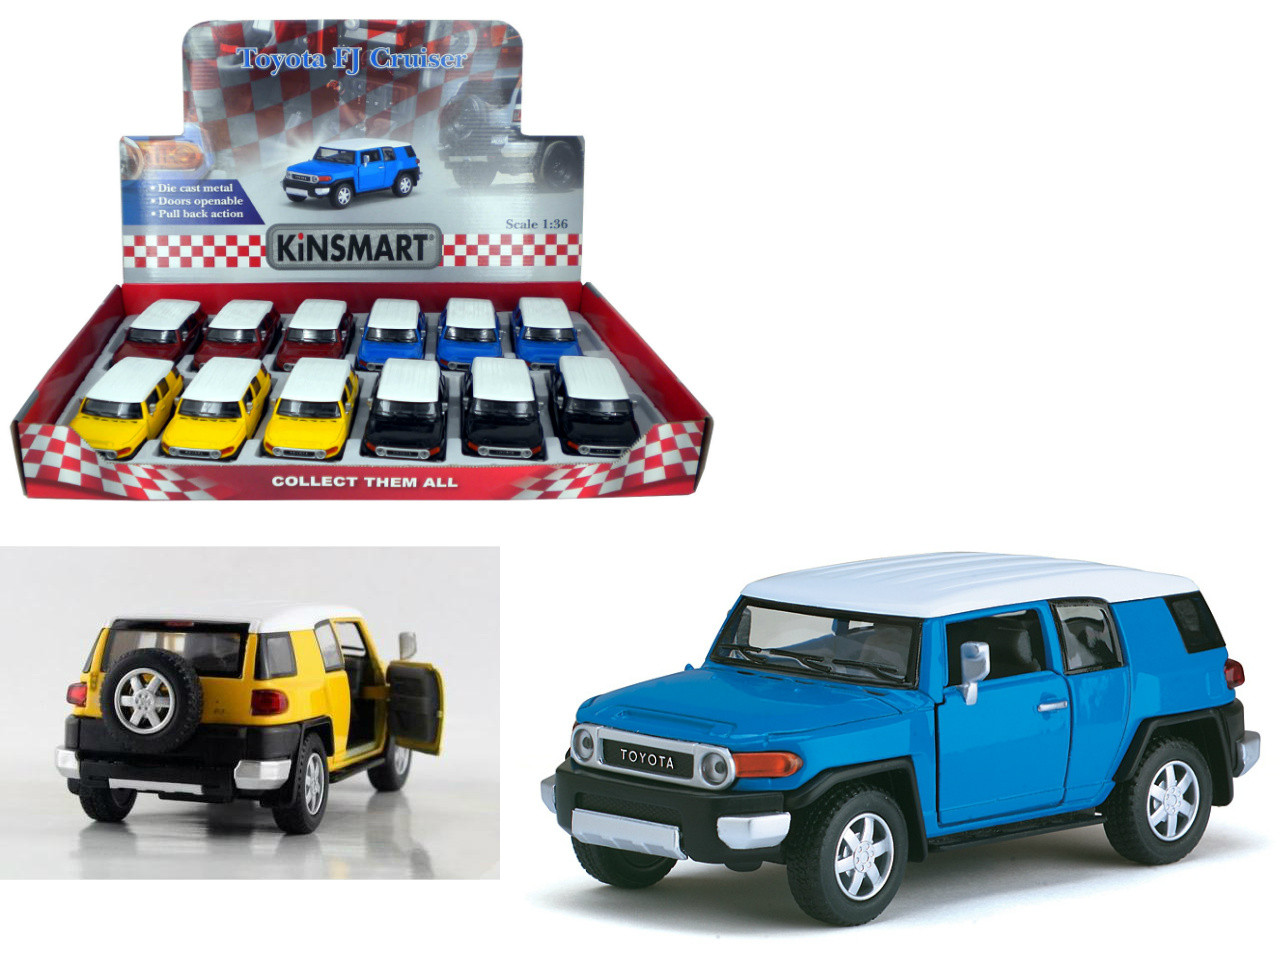 Toyota Fj Cruiser Toy Car Box Of 12 Pull Back 5 1 36 Scale By